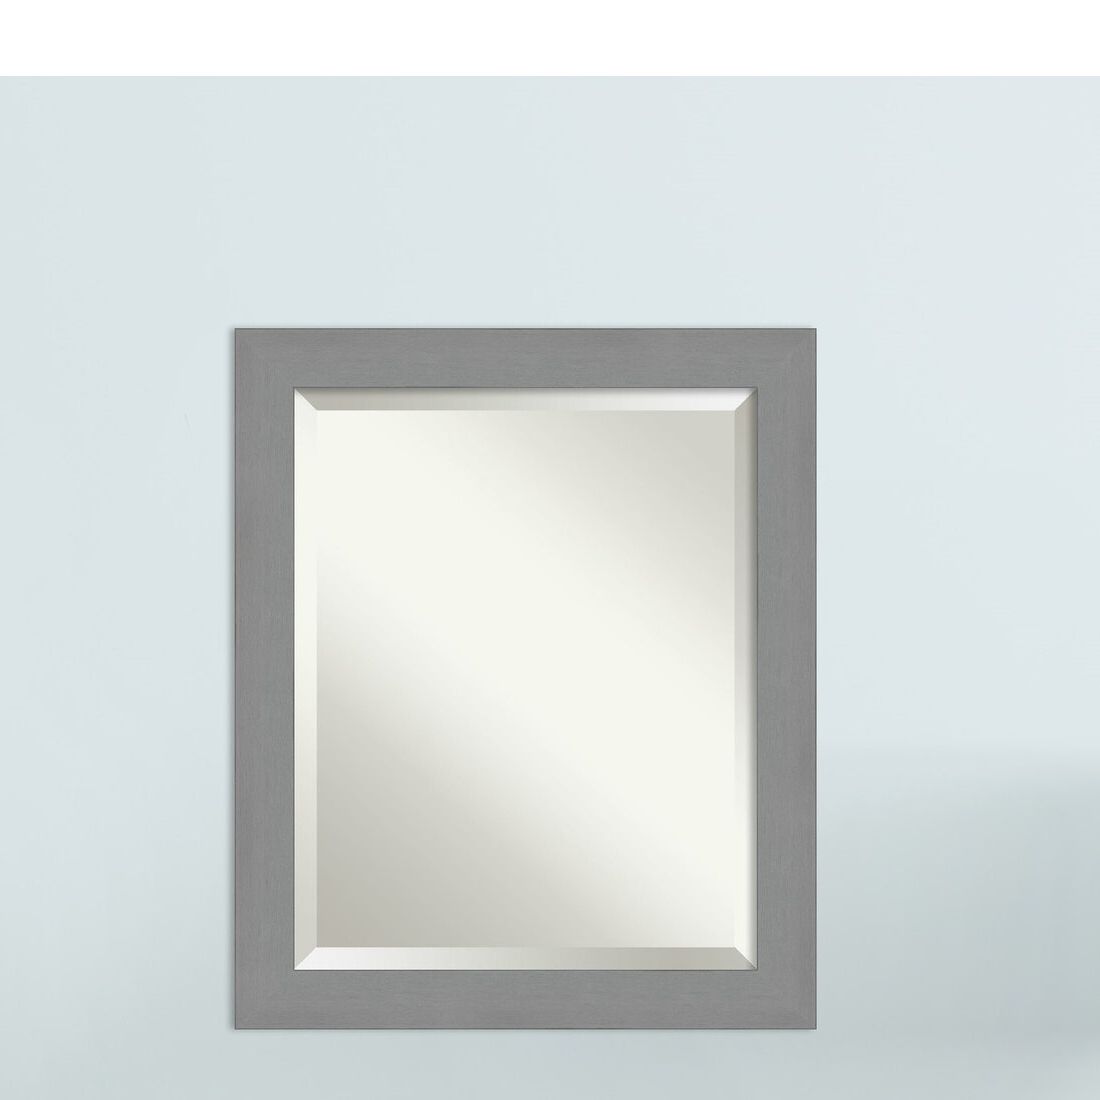 Brushed Nickel Wall Mirrors For Bathroom With Well Known Kallas Brushed Nickel Beveled Wall Mirror (View 16 of 20)